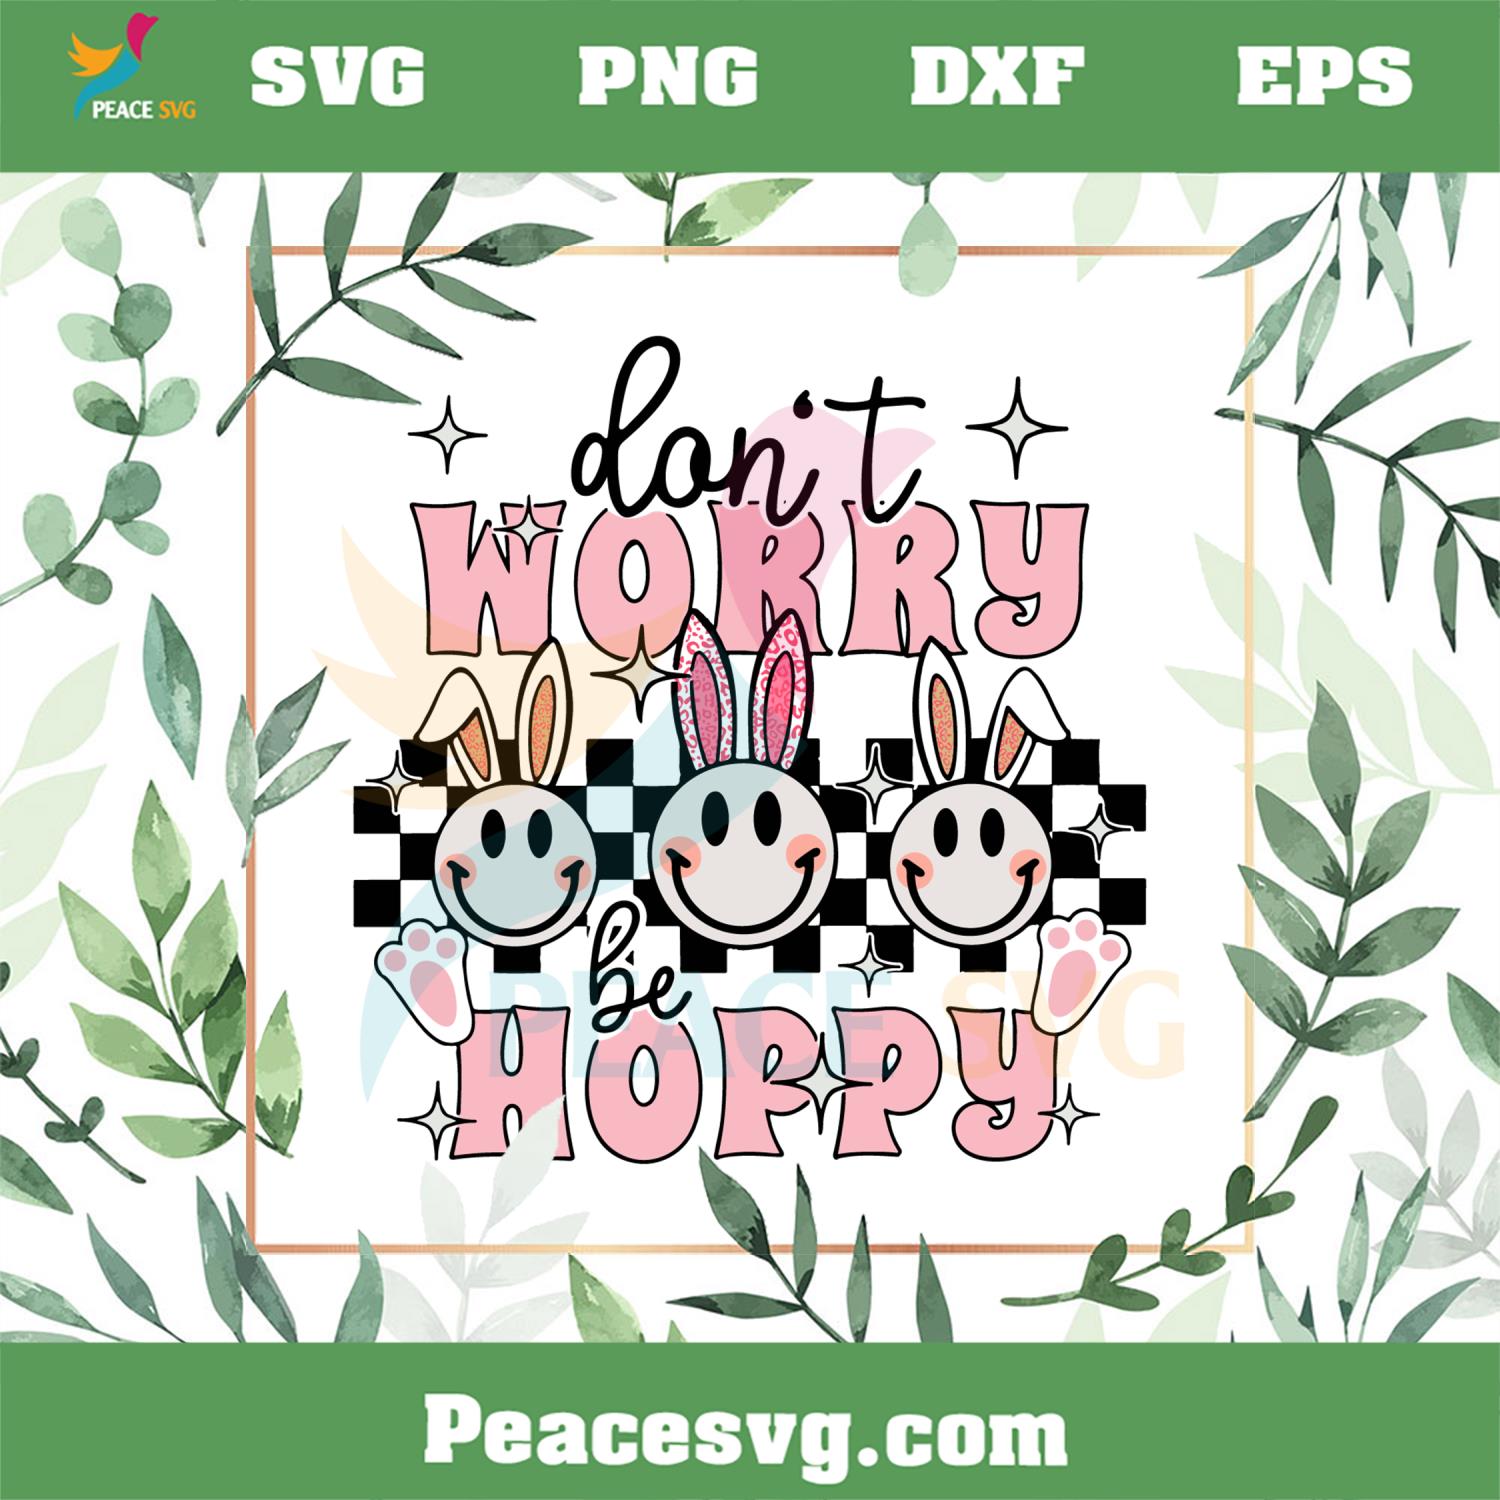 Don’t Worry Be Hoppy Retro Groovy Smiley Bunny SVG Cutting Files